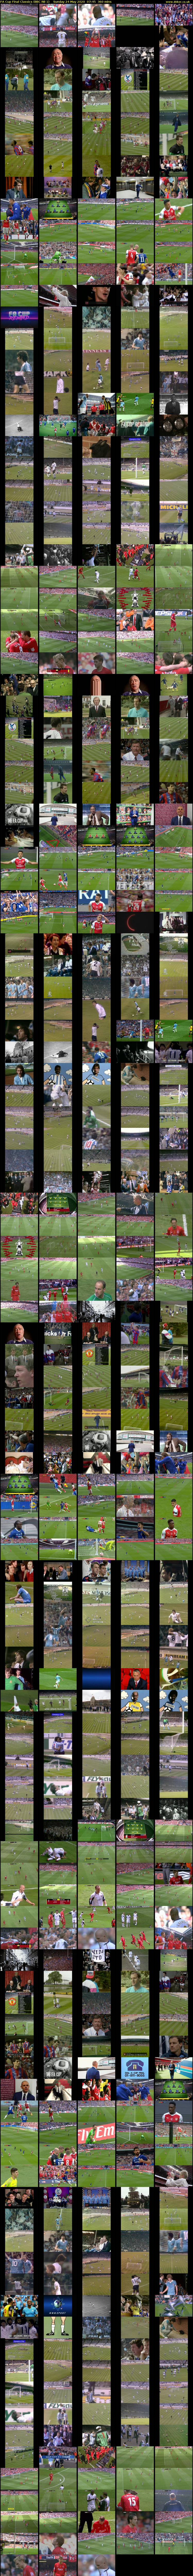 FA Cup Final Classics (BBC RB 1) Sunday 24 May 2020 07:45 - 13:45